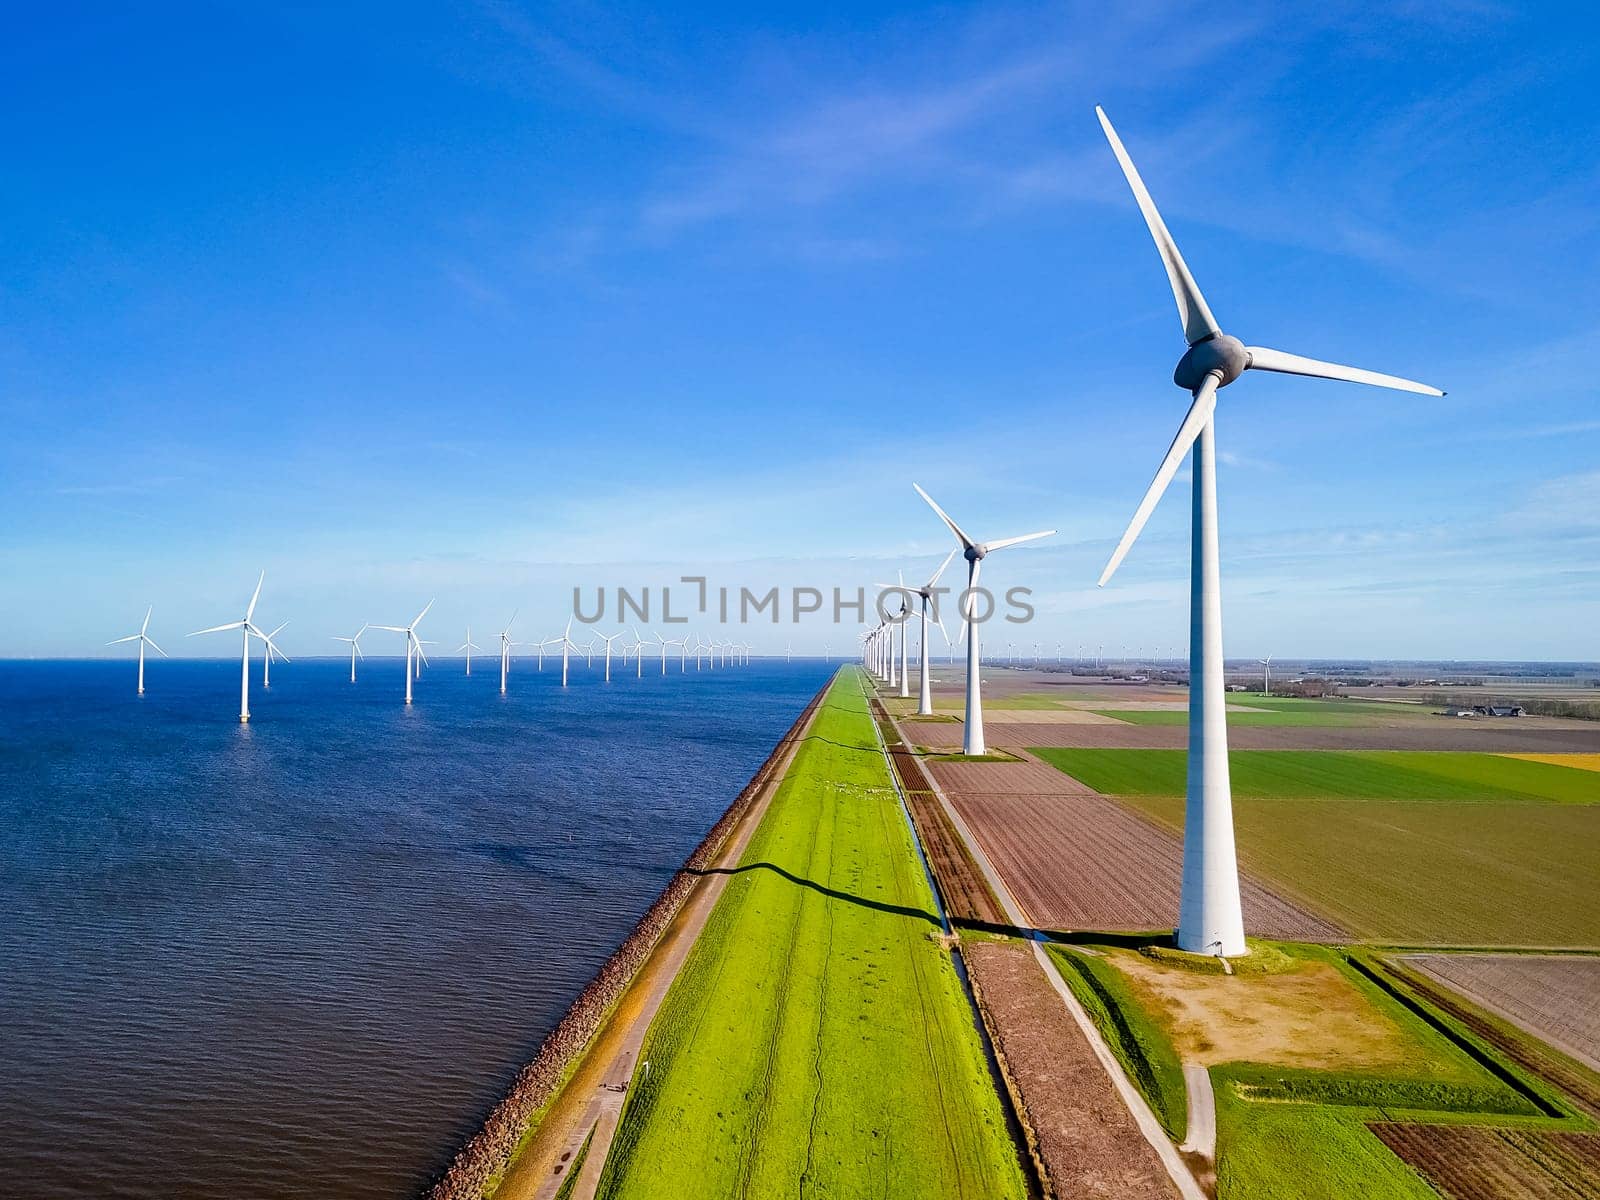 A serene scene in the heart of the Netherlands, where a row of wind turbines gracefully spin next to a peaceful body of water in the vibrant season of Spring. energy transition